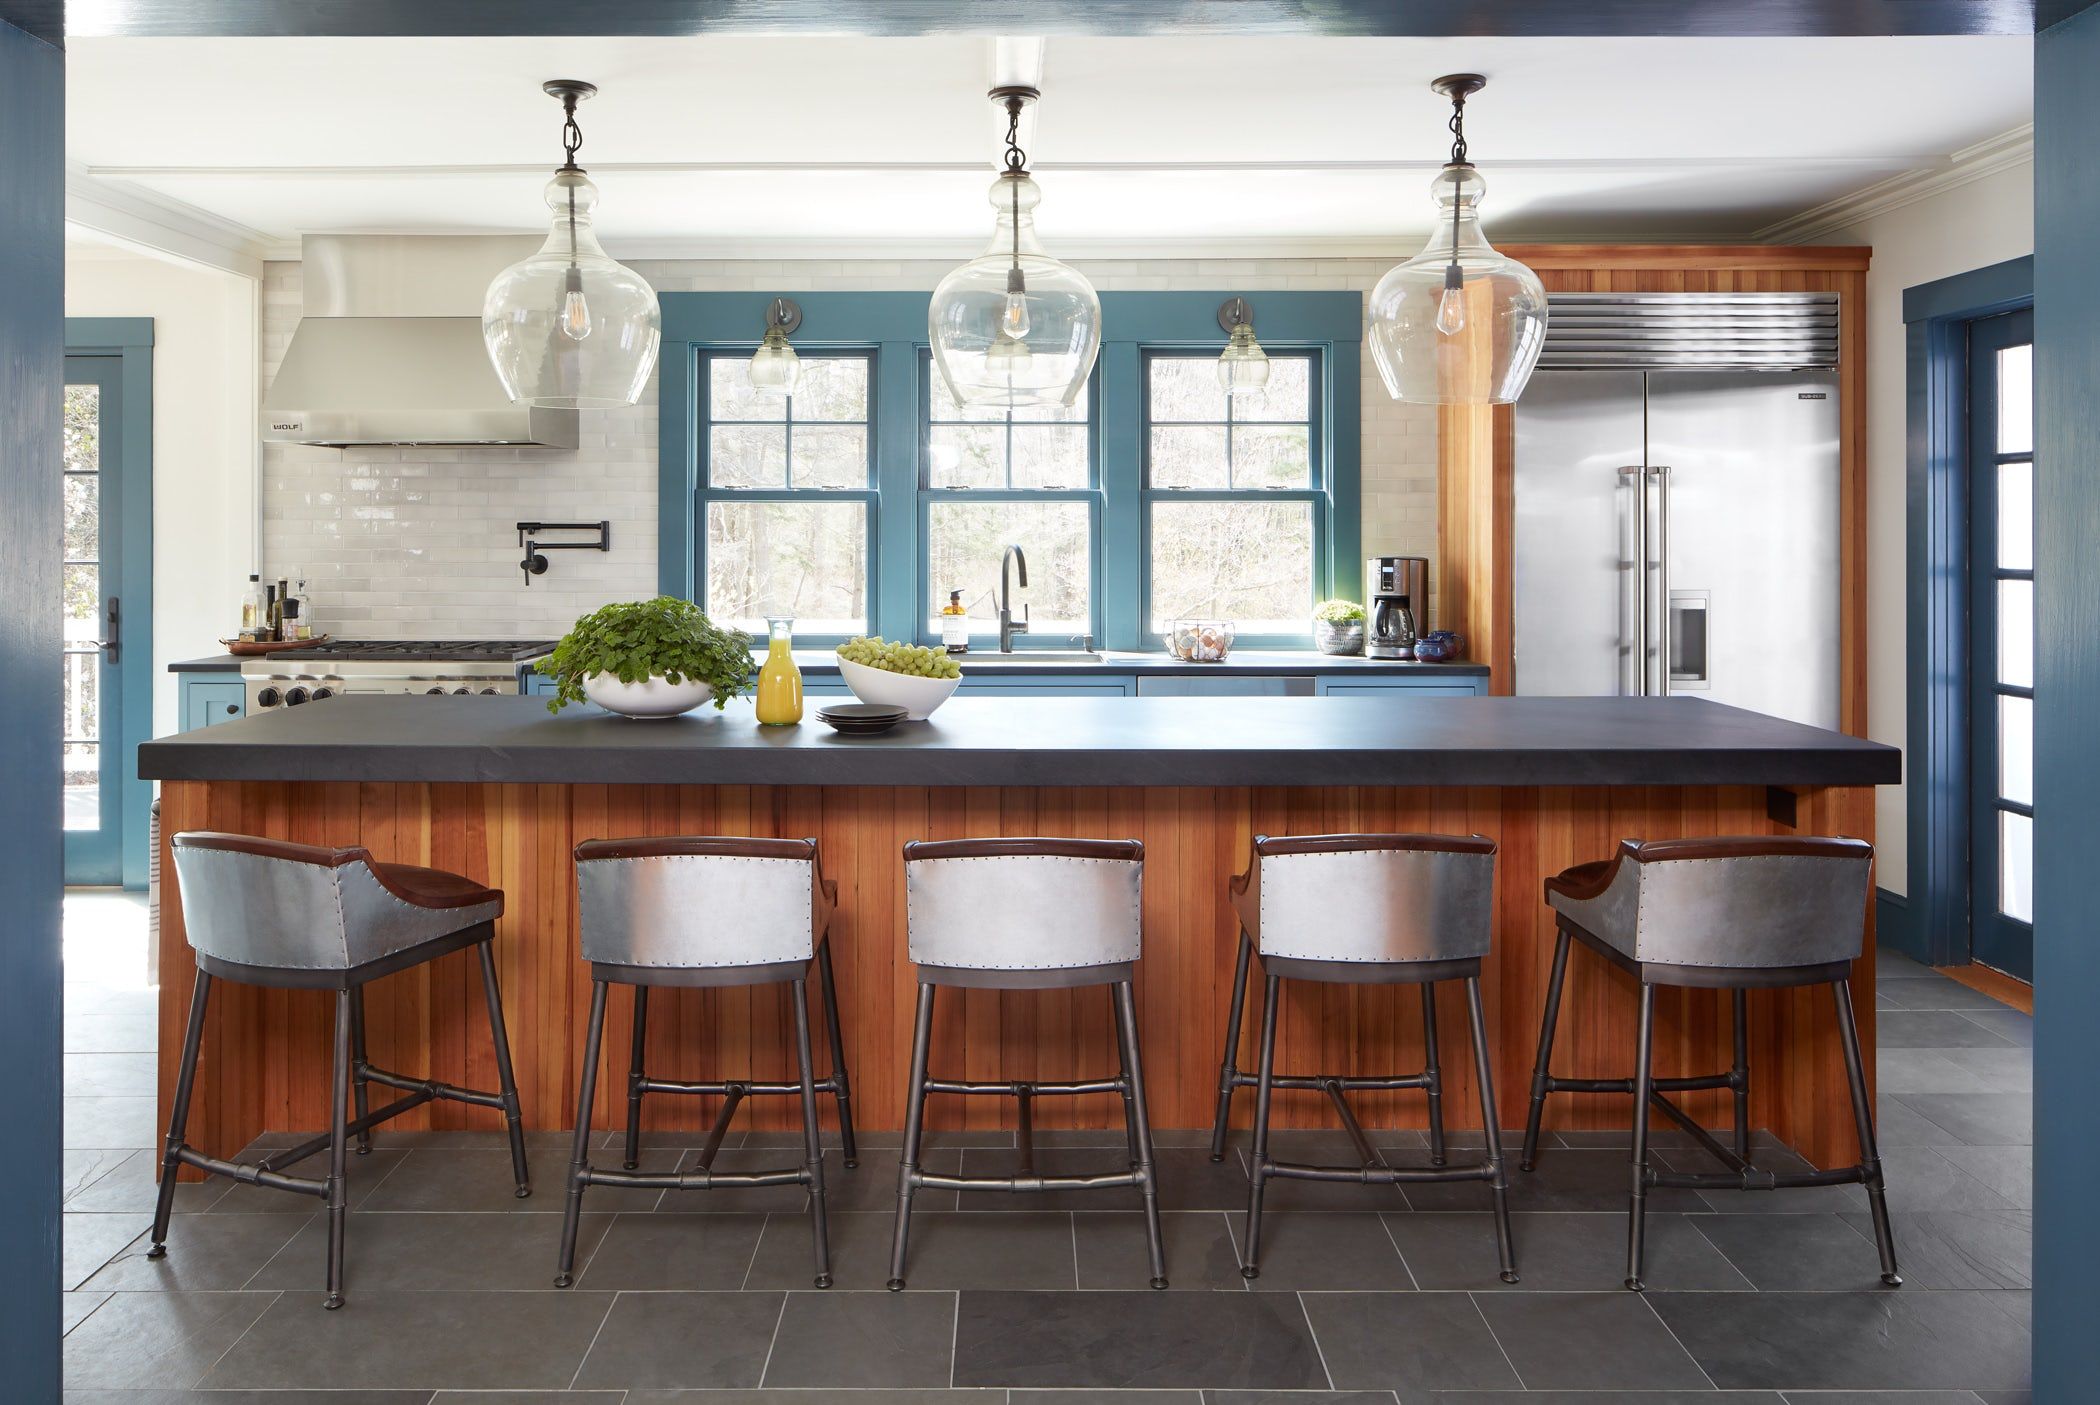 18 kitchen designs that will inspire you to cook up a storm